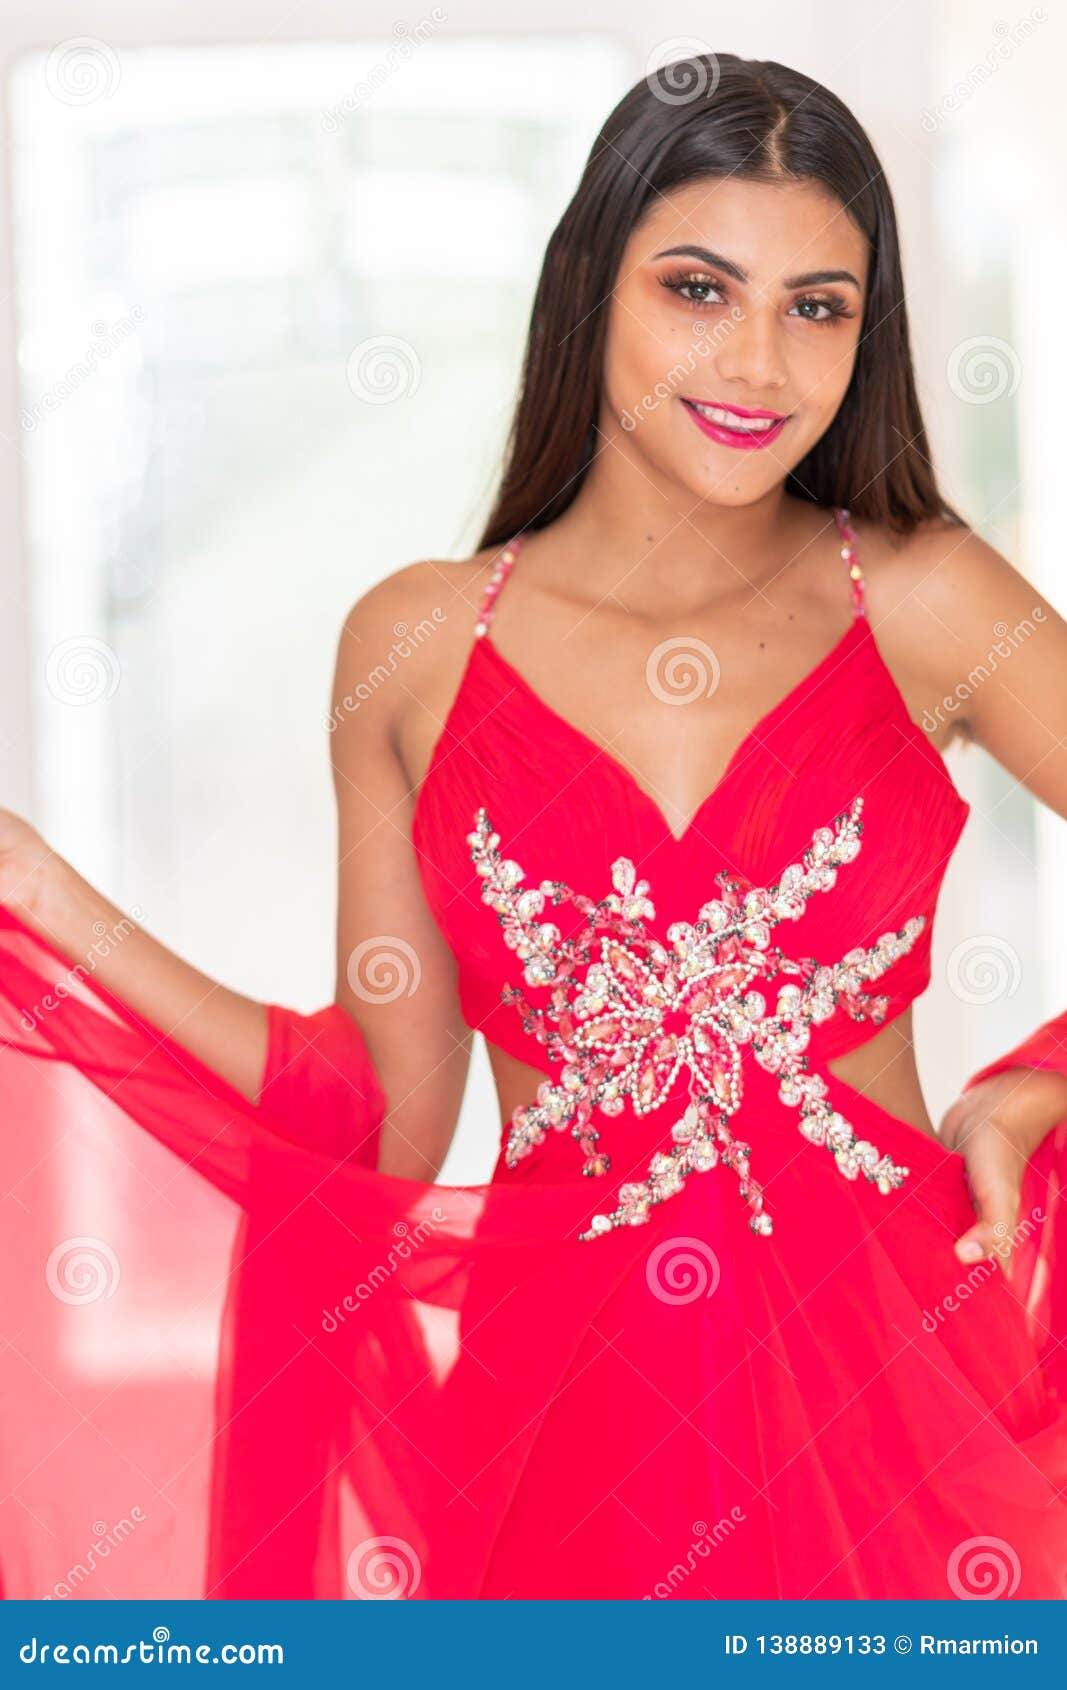 Teen Girl At Prom Stock Image Image Of Woman Style